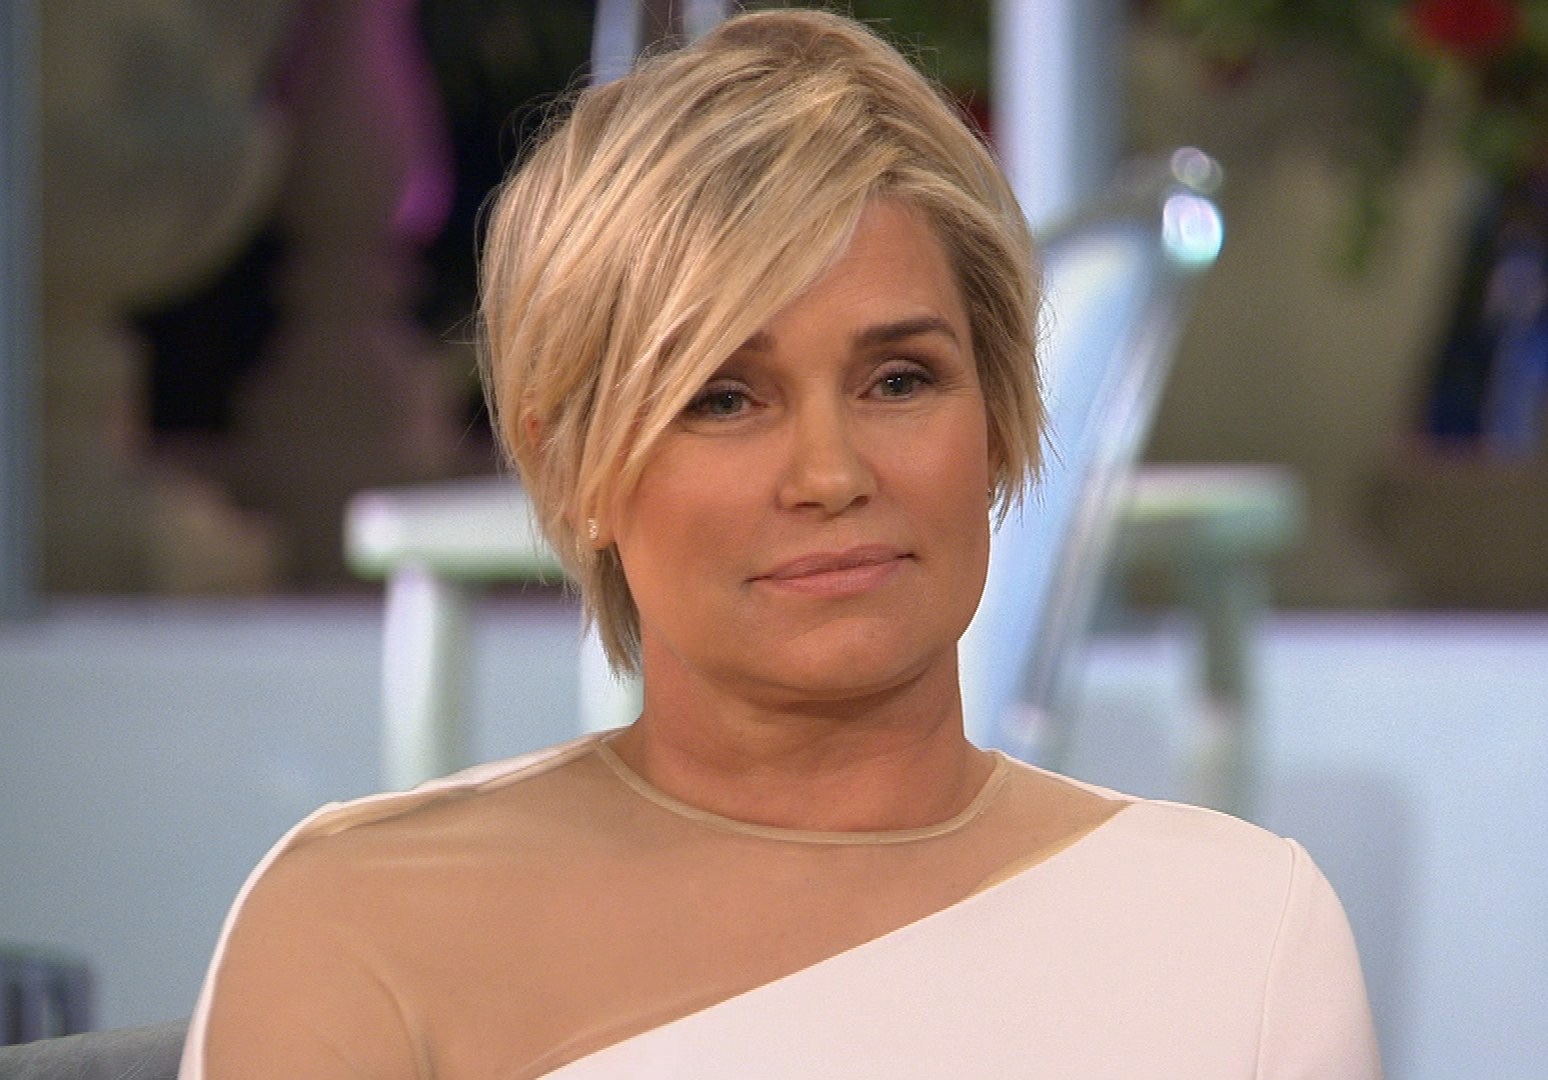 Yolanda Hadid Opens Up About How Lyme Disease Nearly Destroyed Her! 